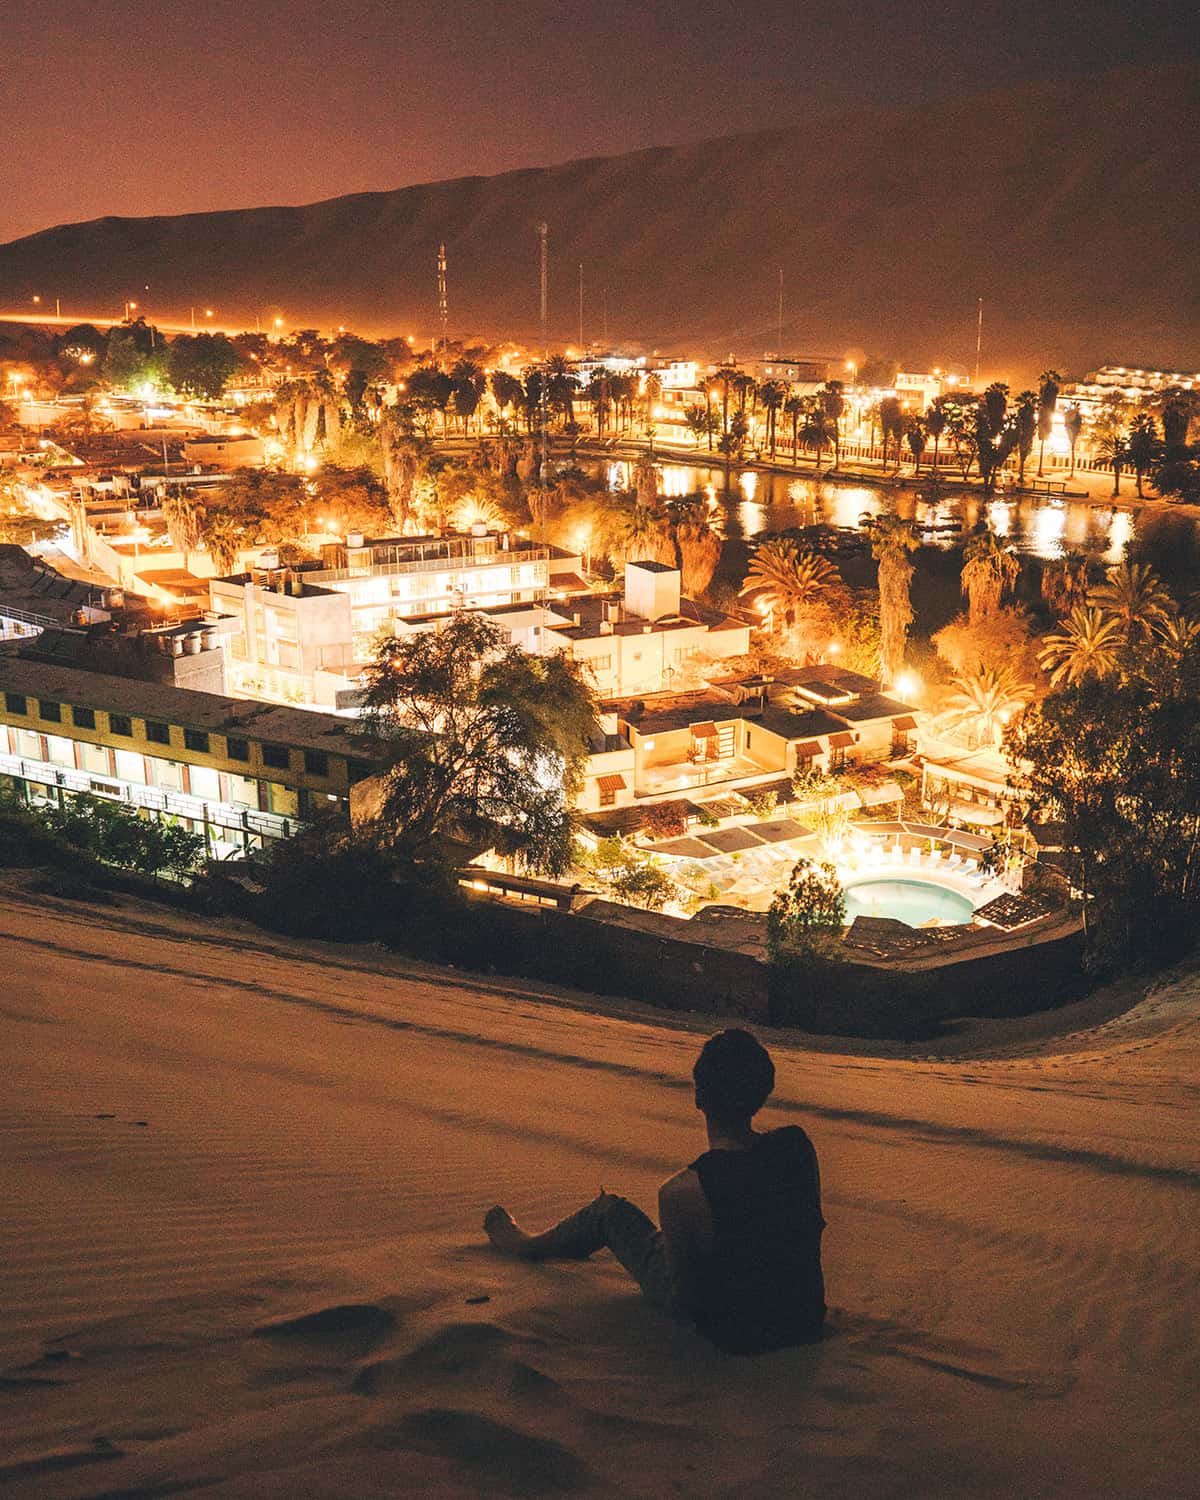 Bright lights of the Huacachina desert oasis at night